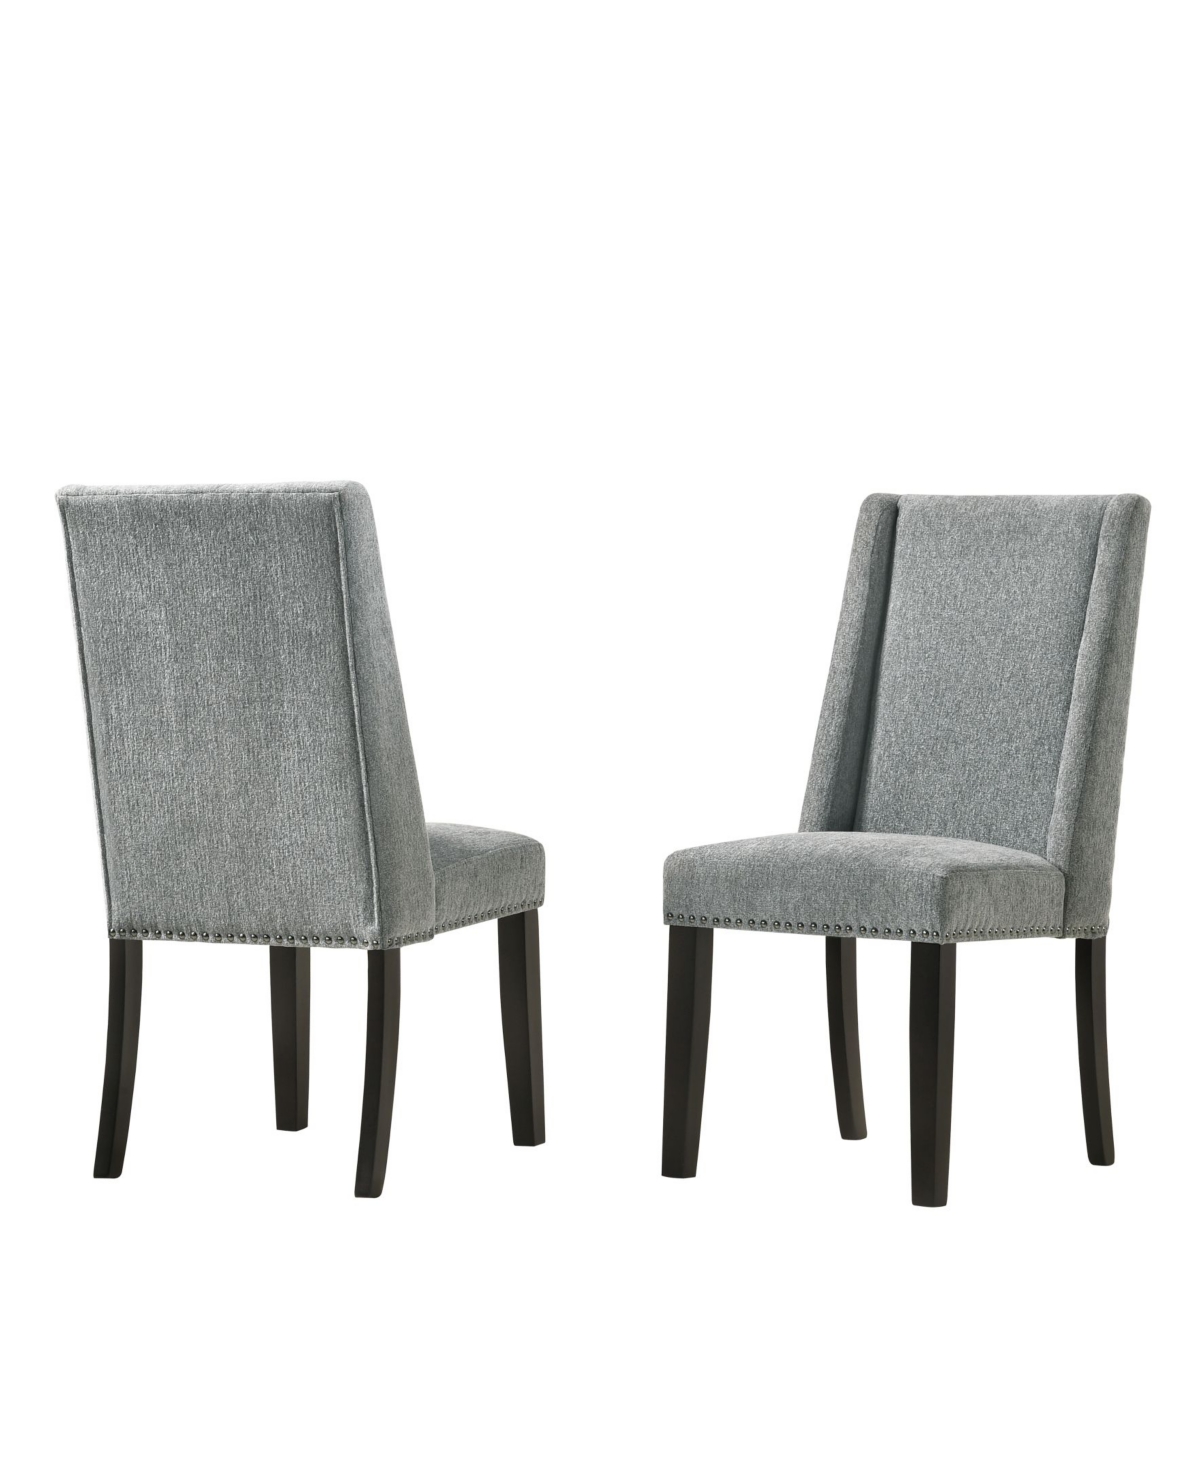 Zoe Upholstered Dining Chair, Set of 2